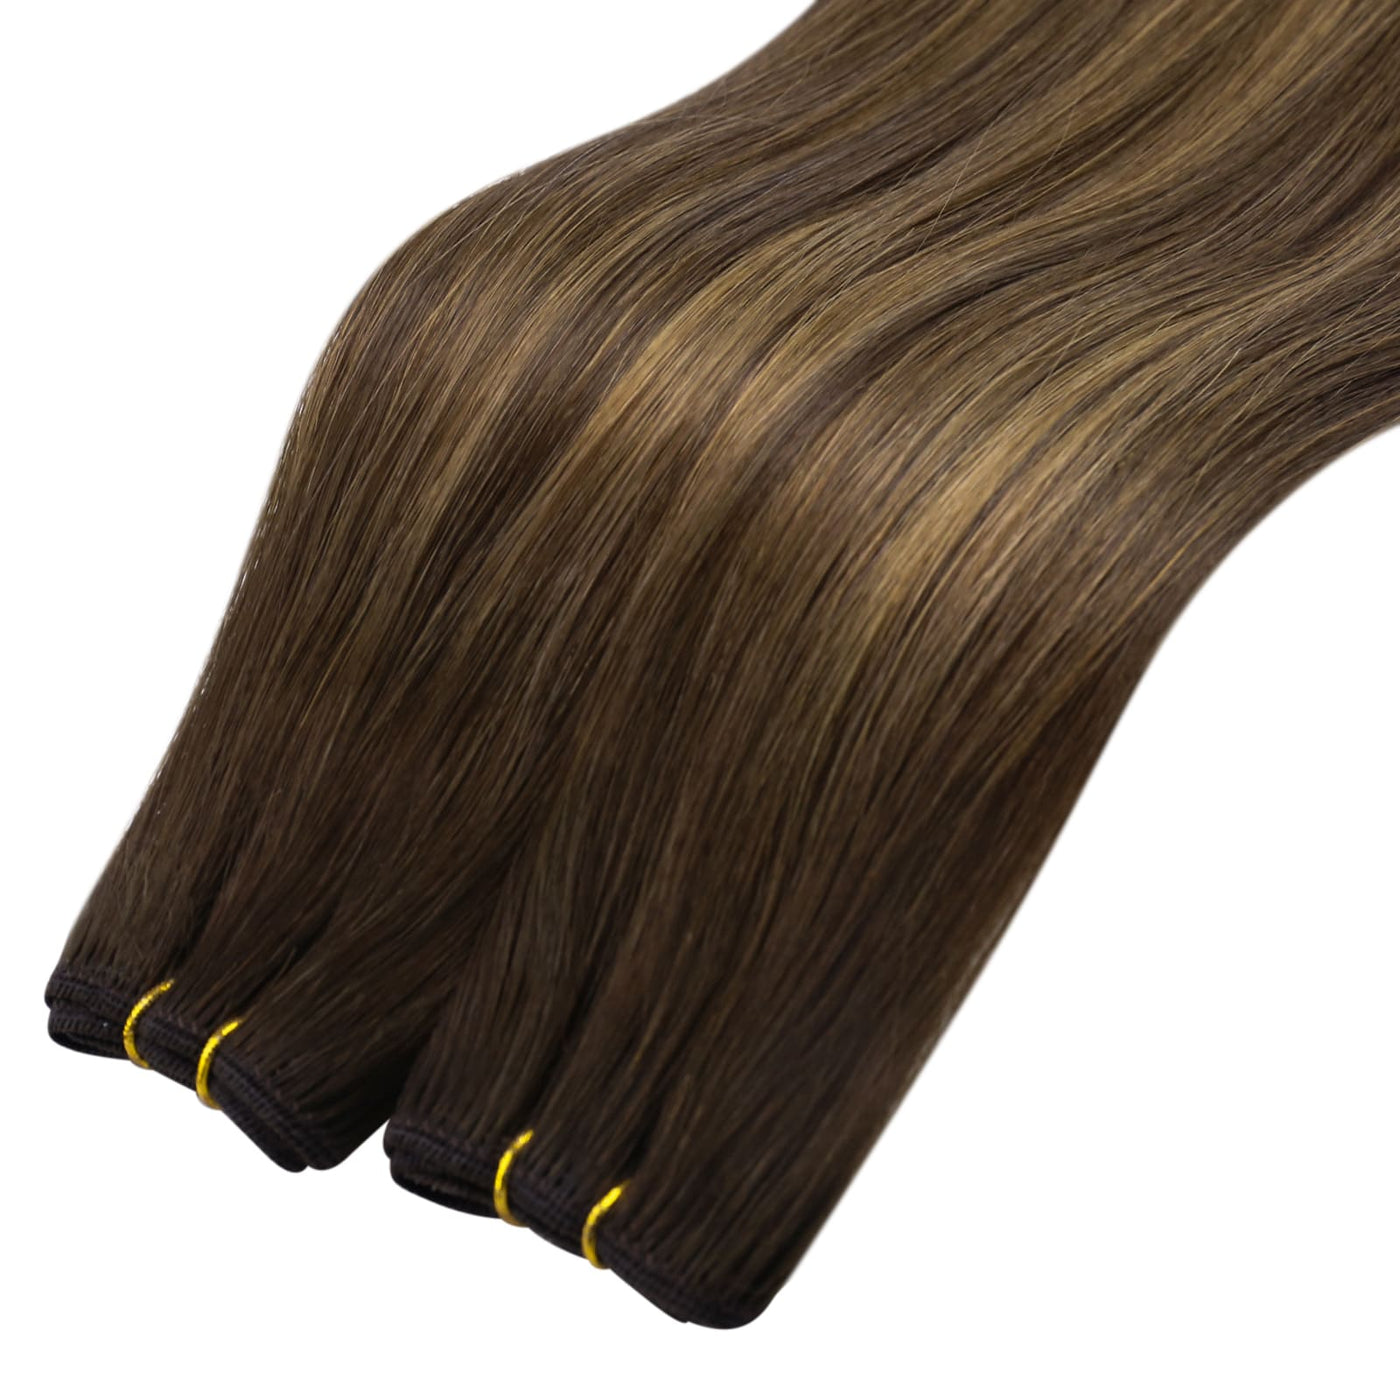 100 human hair sew in weft